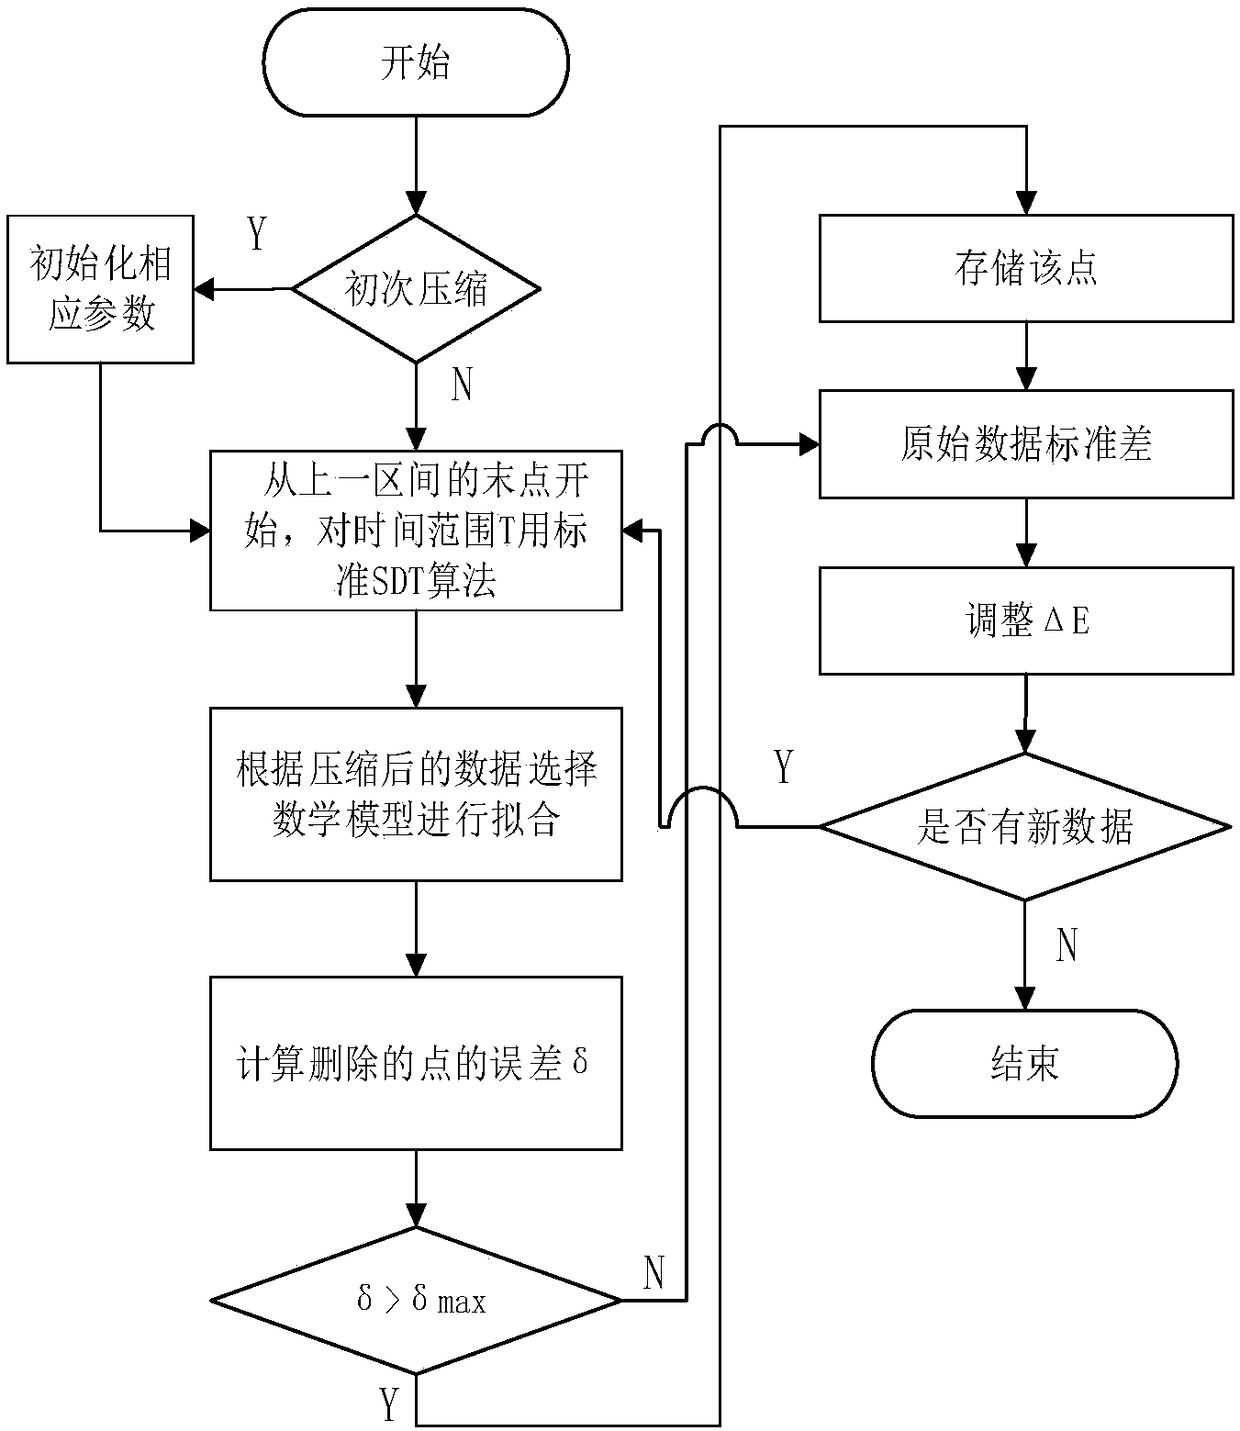 SDT improvement method applied to field of numerical control machine tool monitoring